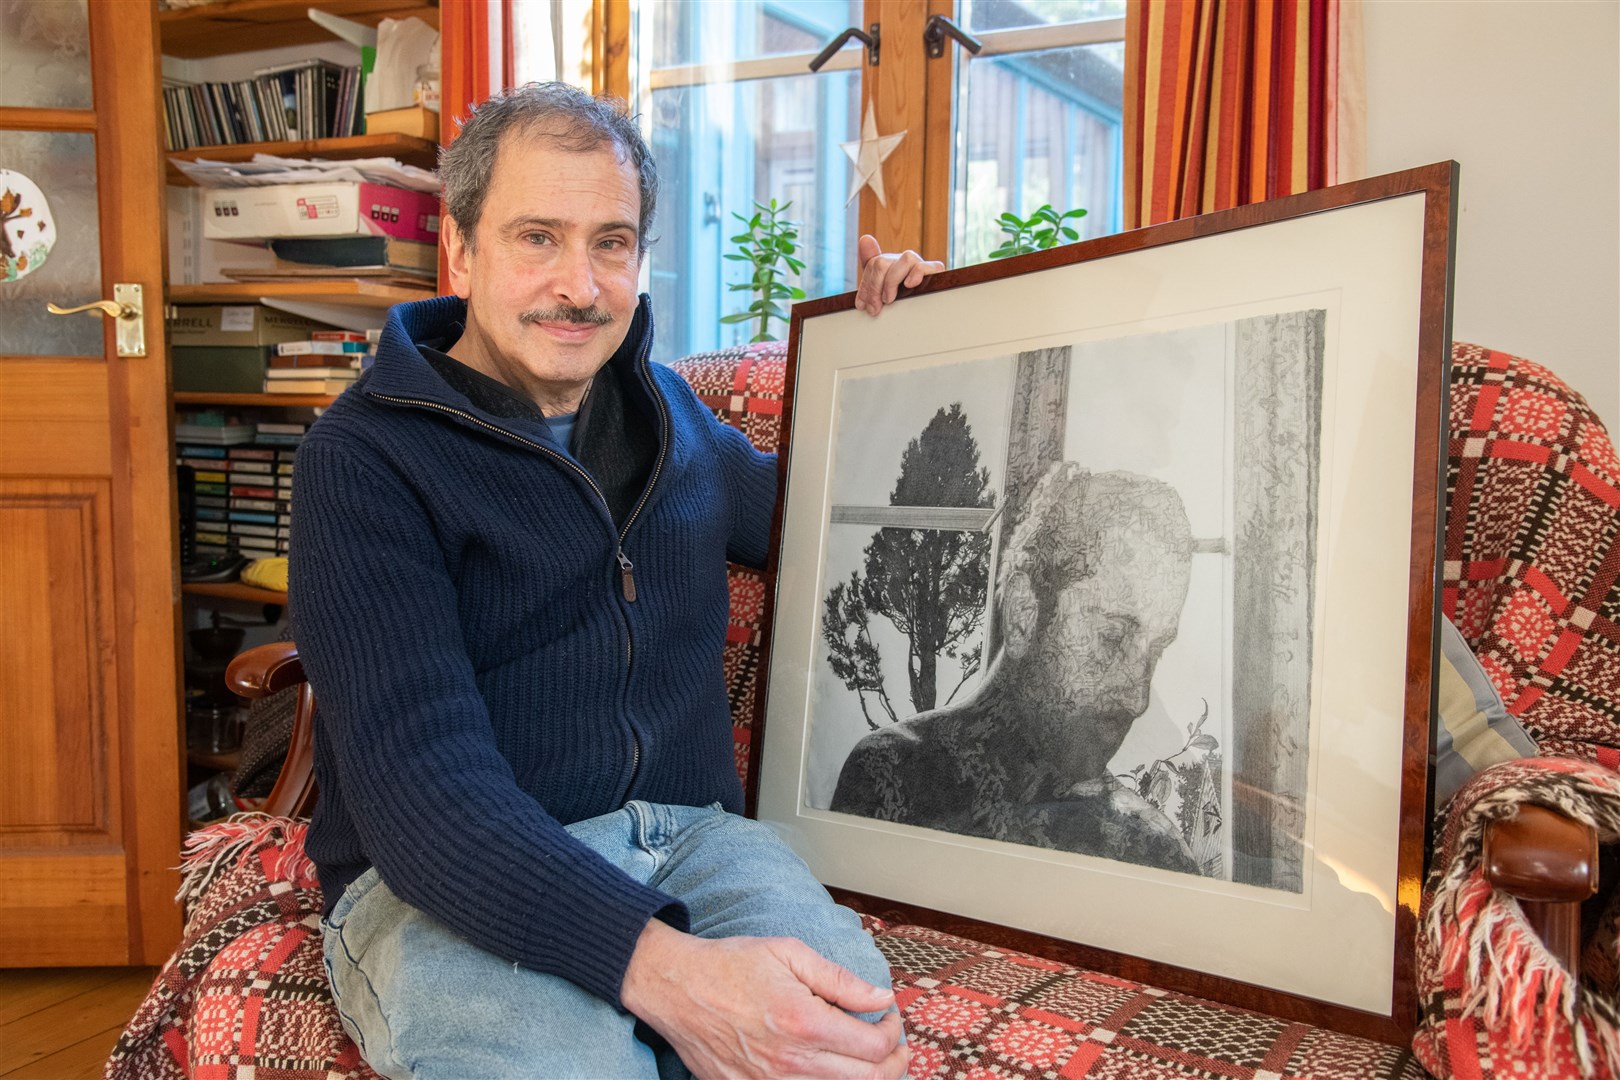 Randy Klinger with a portrait of himself drawn in pencil. Picture: Daniel Forsyth.